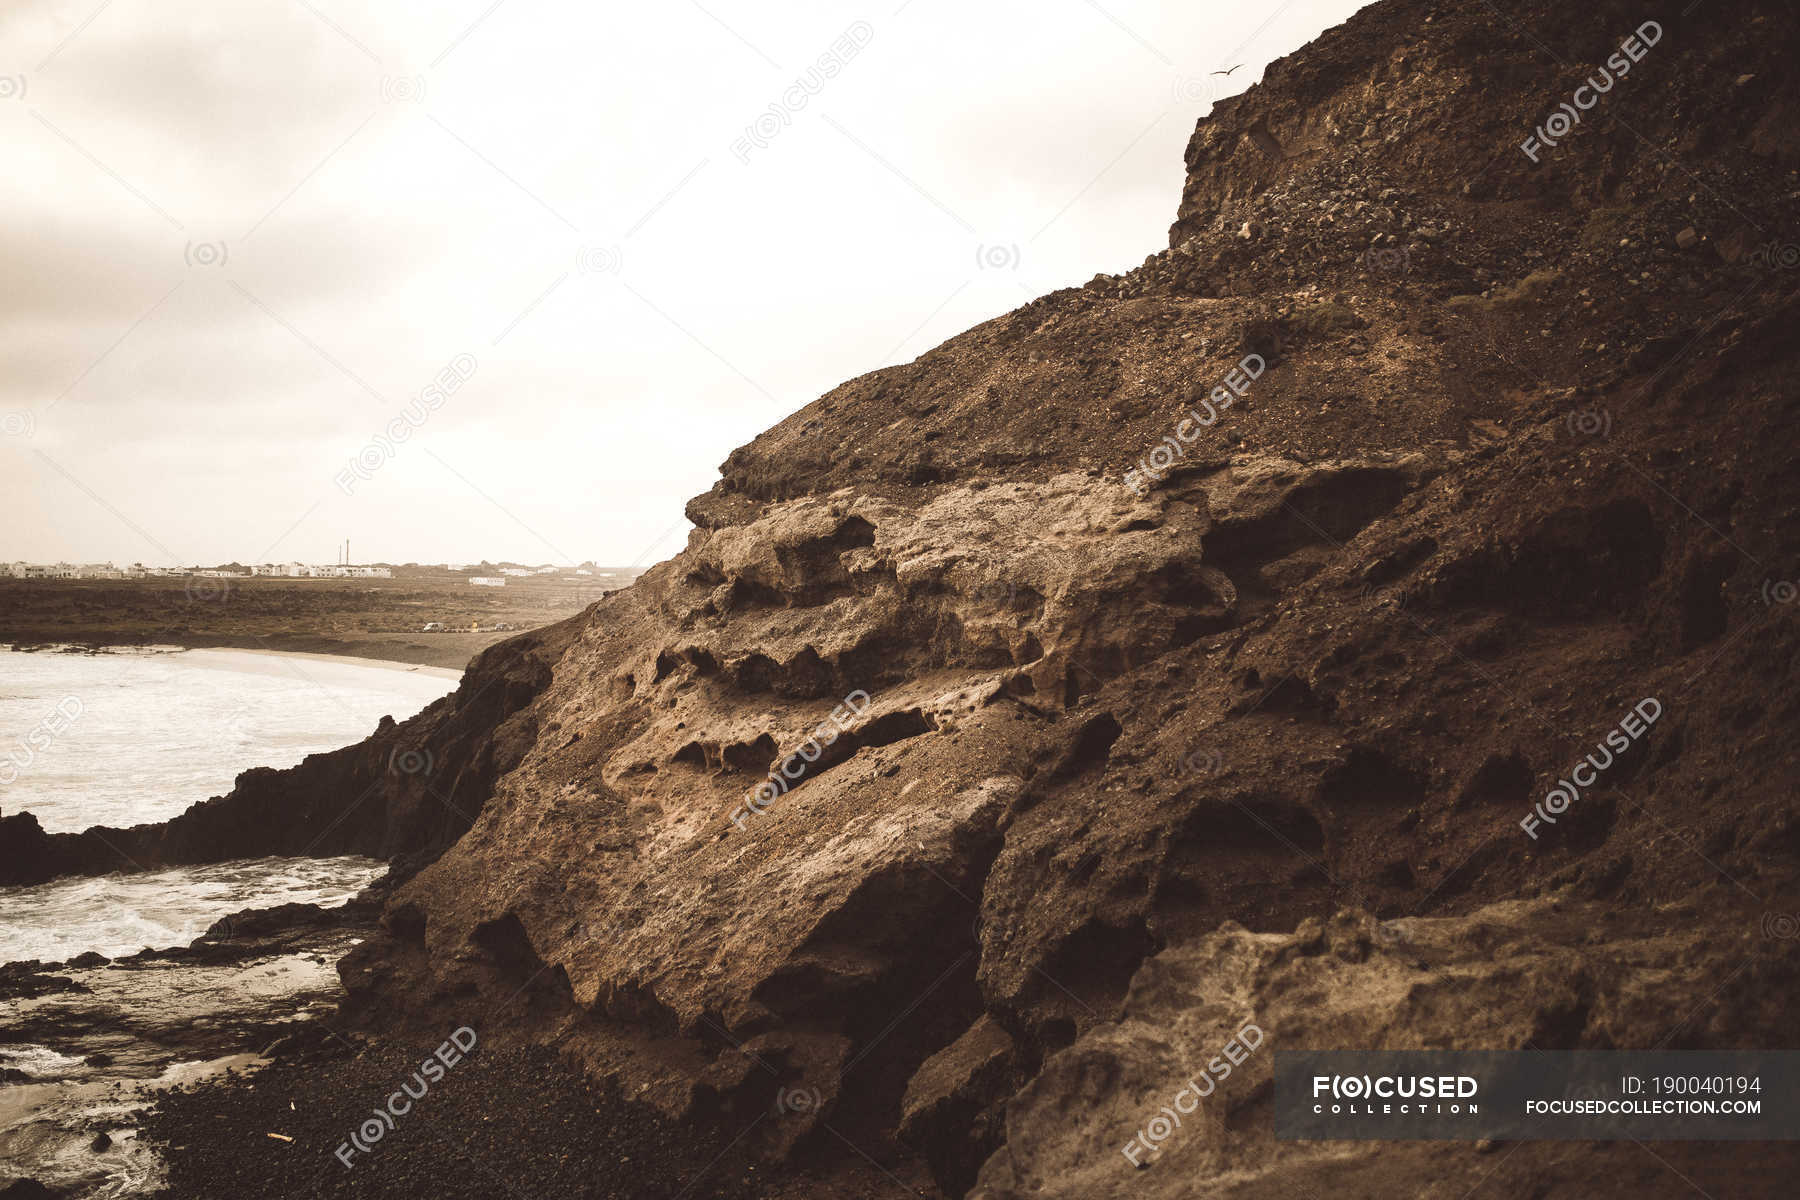 View to dark coastal at ocean shorein cloudy day. — scenic, land - Stock | #190040194